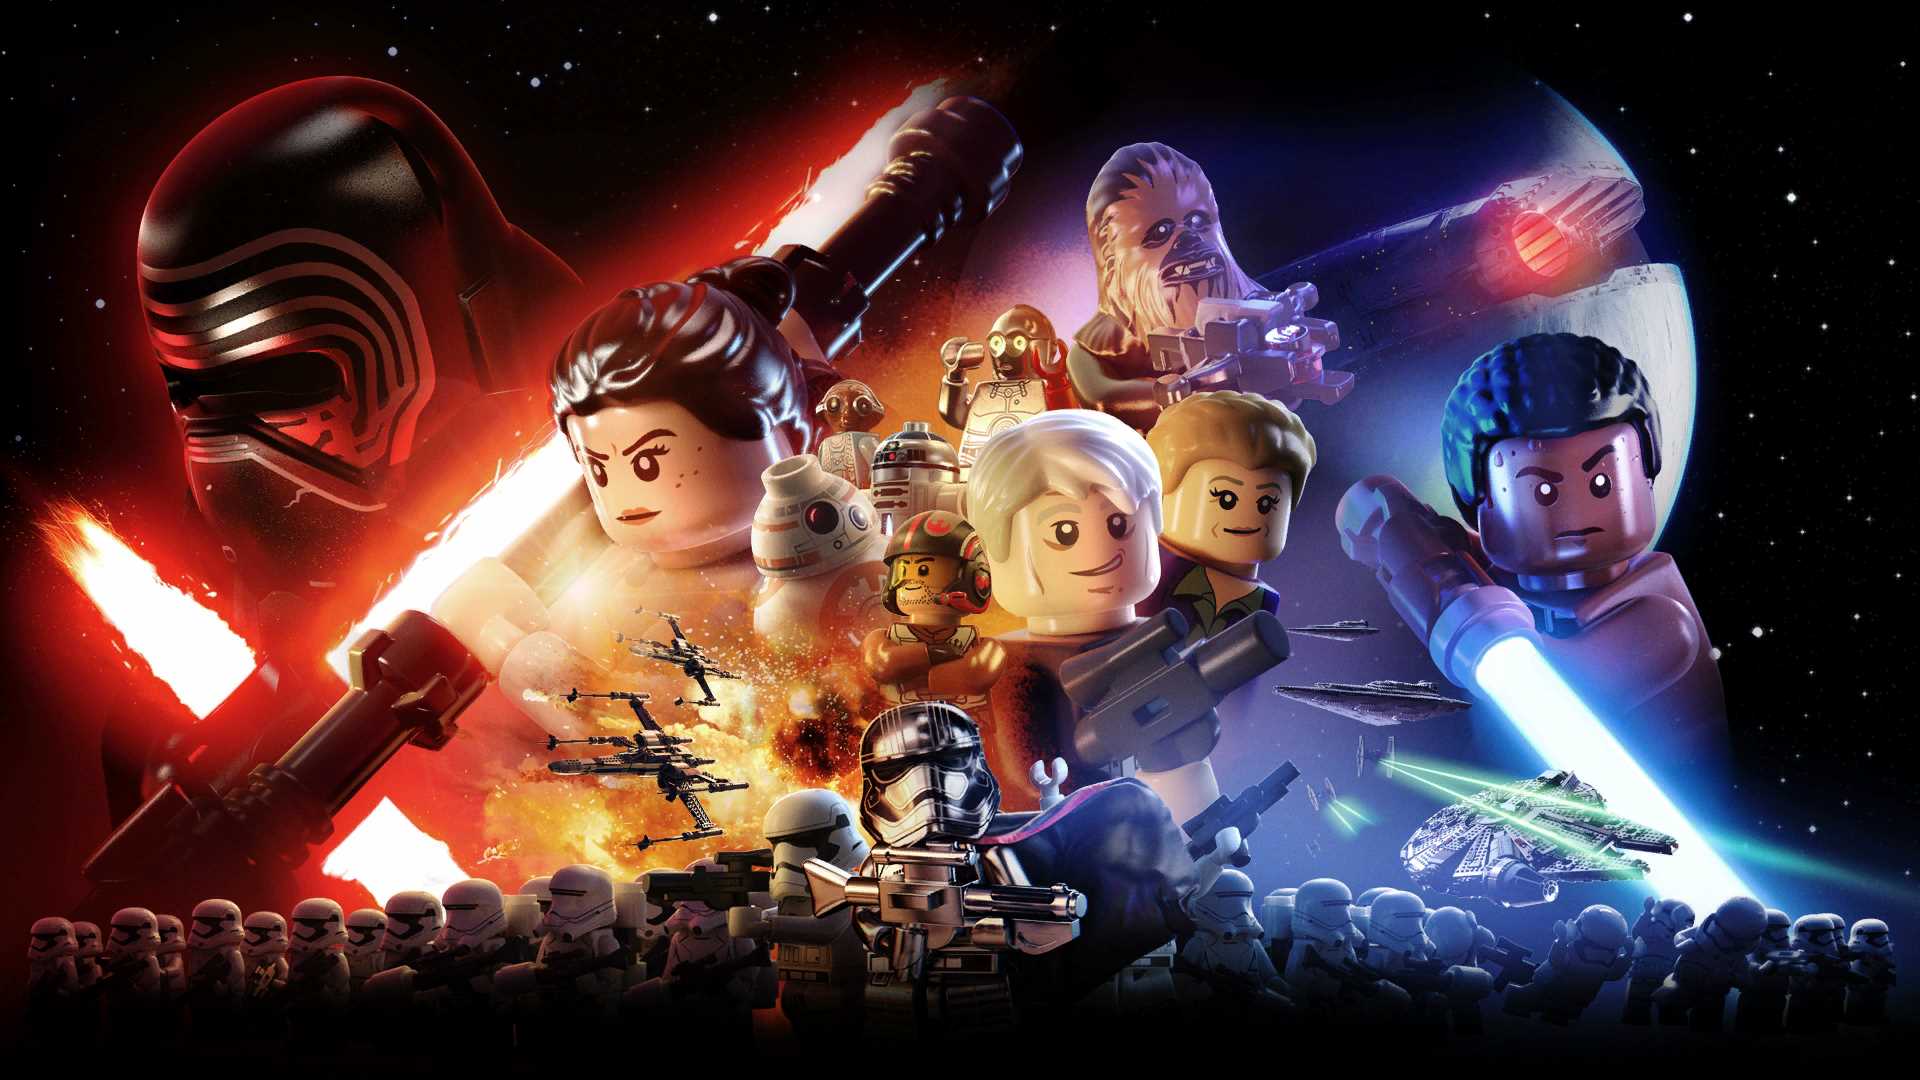 lego-star-wars-the-force-awakens-first-season-pass-dlc-packs-available